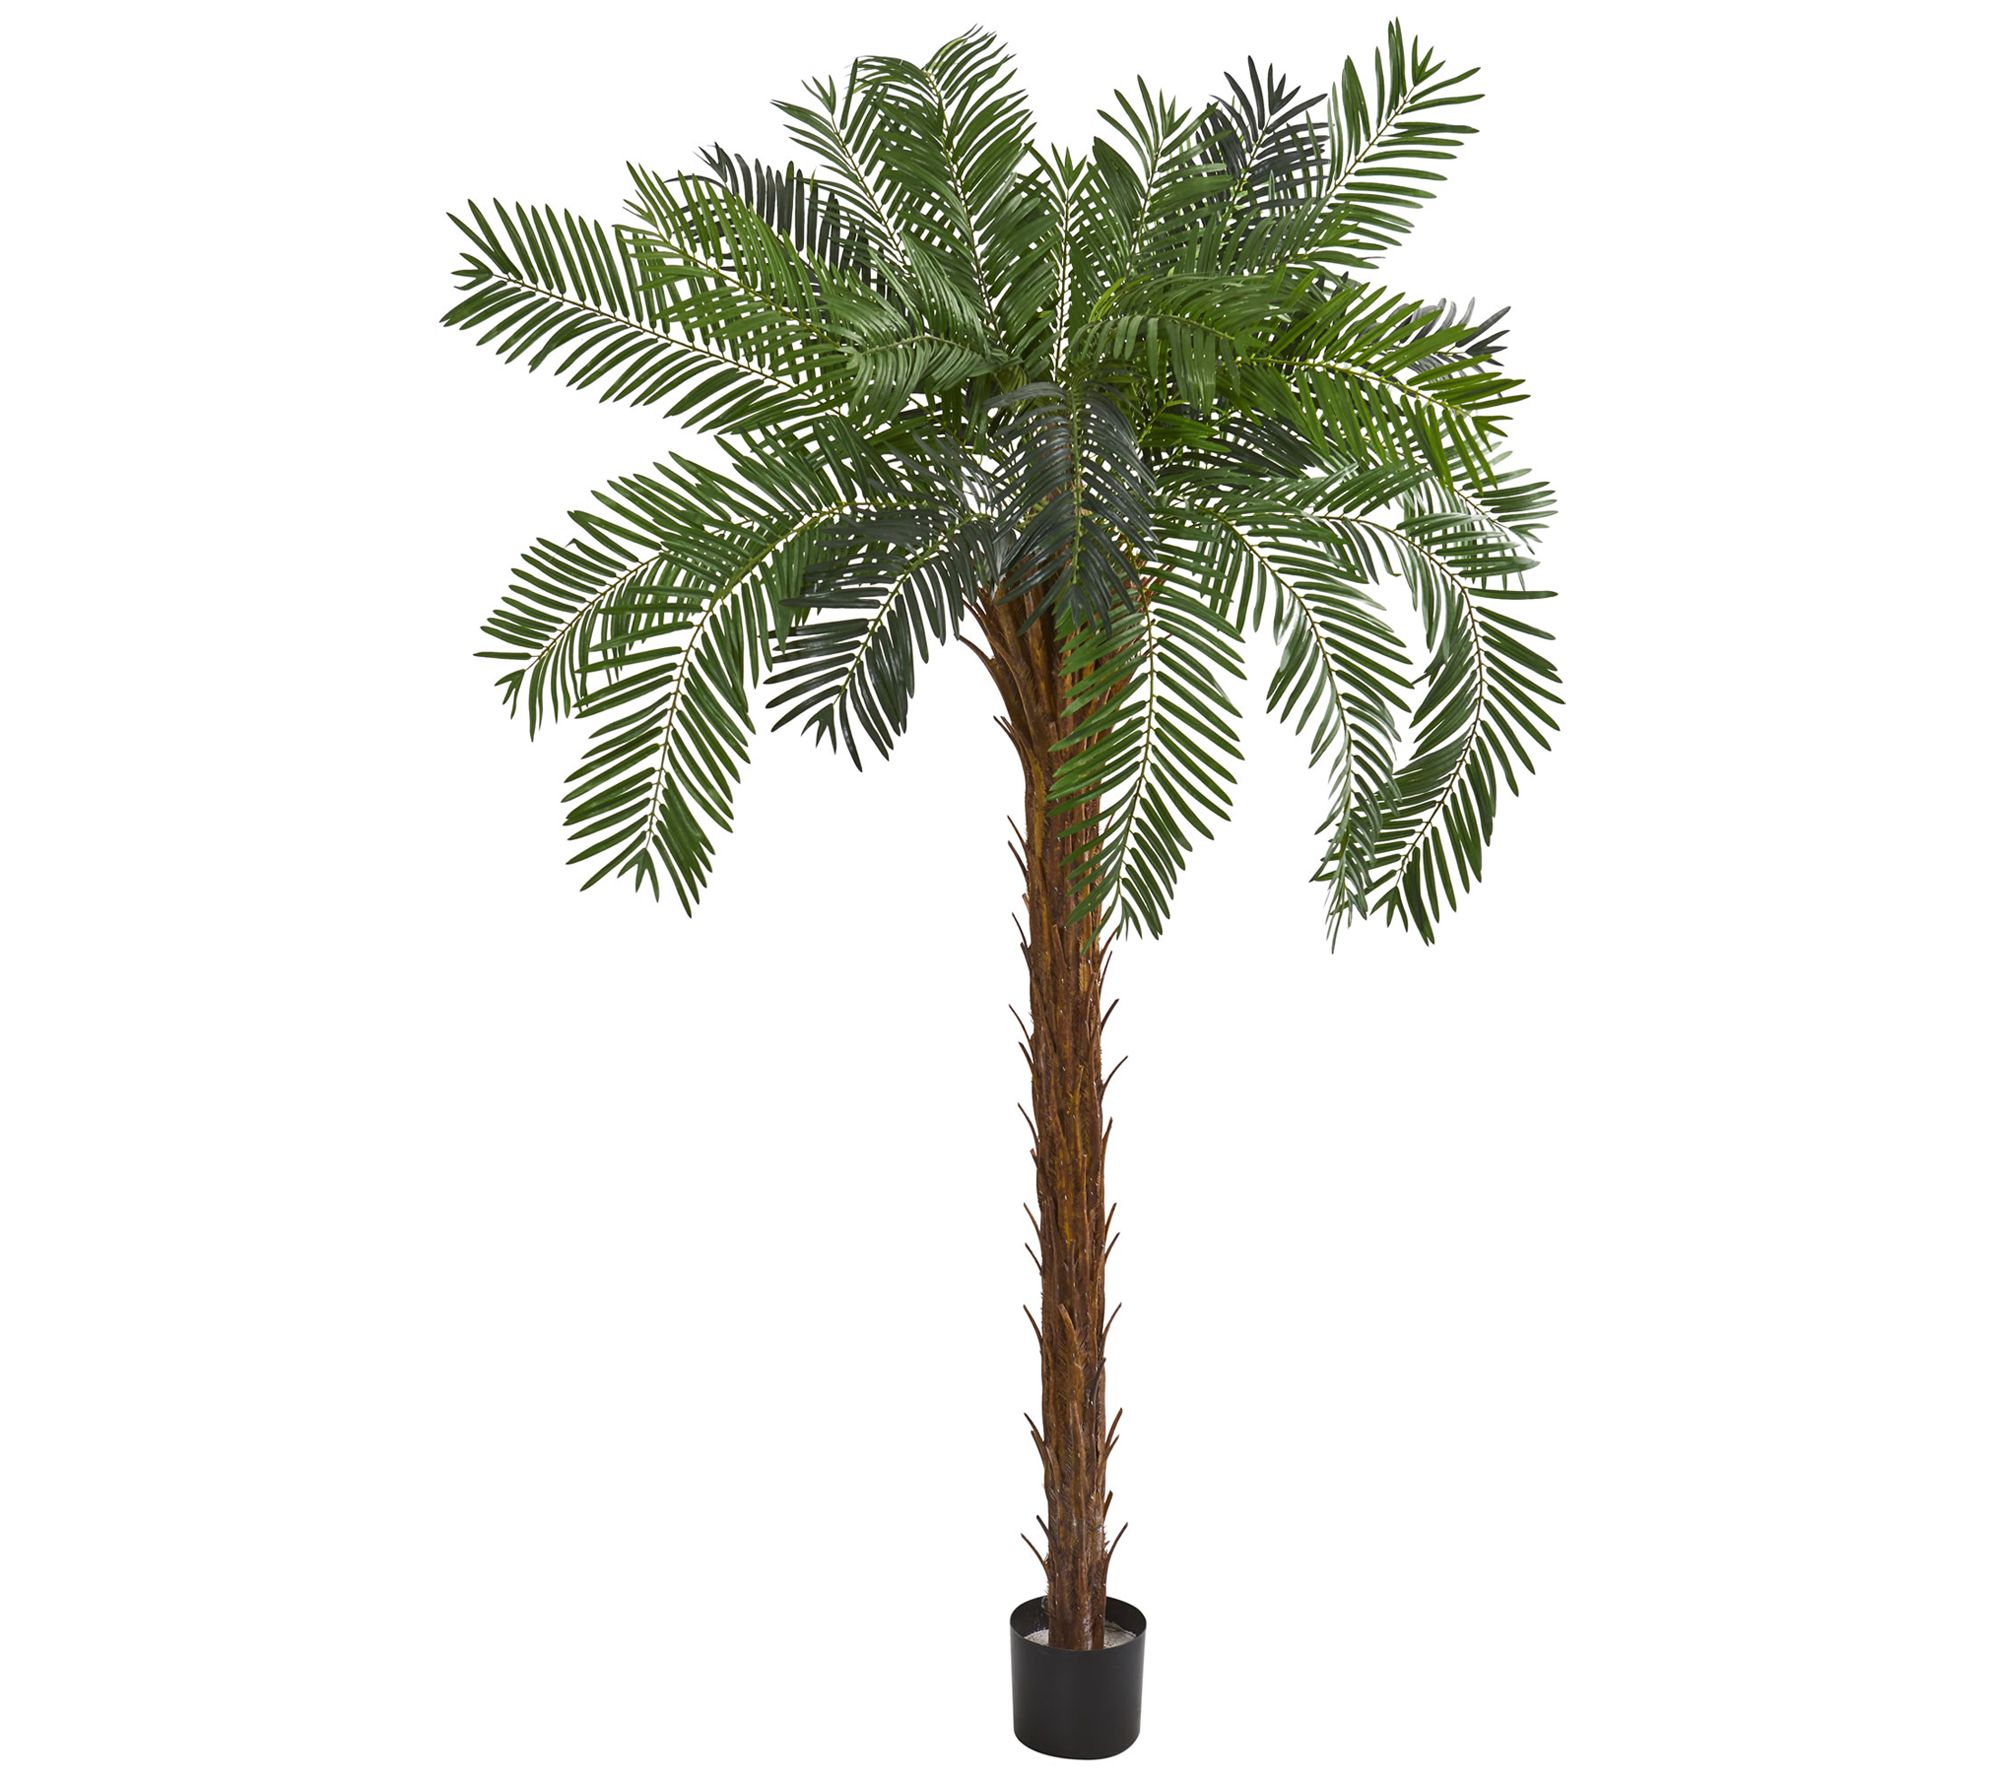 7' Cycas Palm Artificial Tree by Nearly Natural - QVC.com